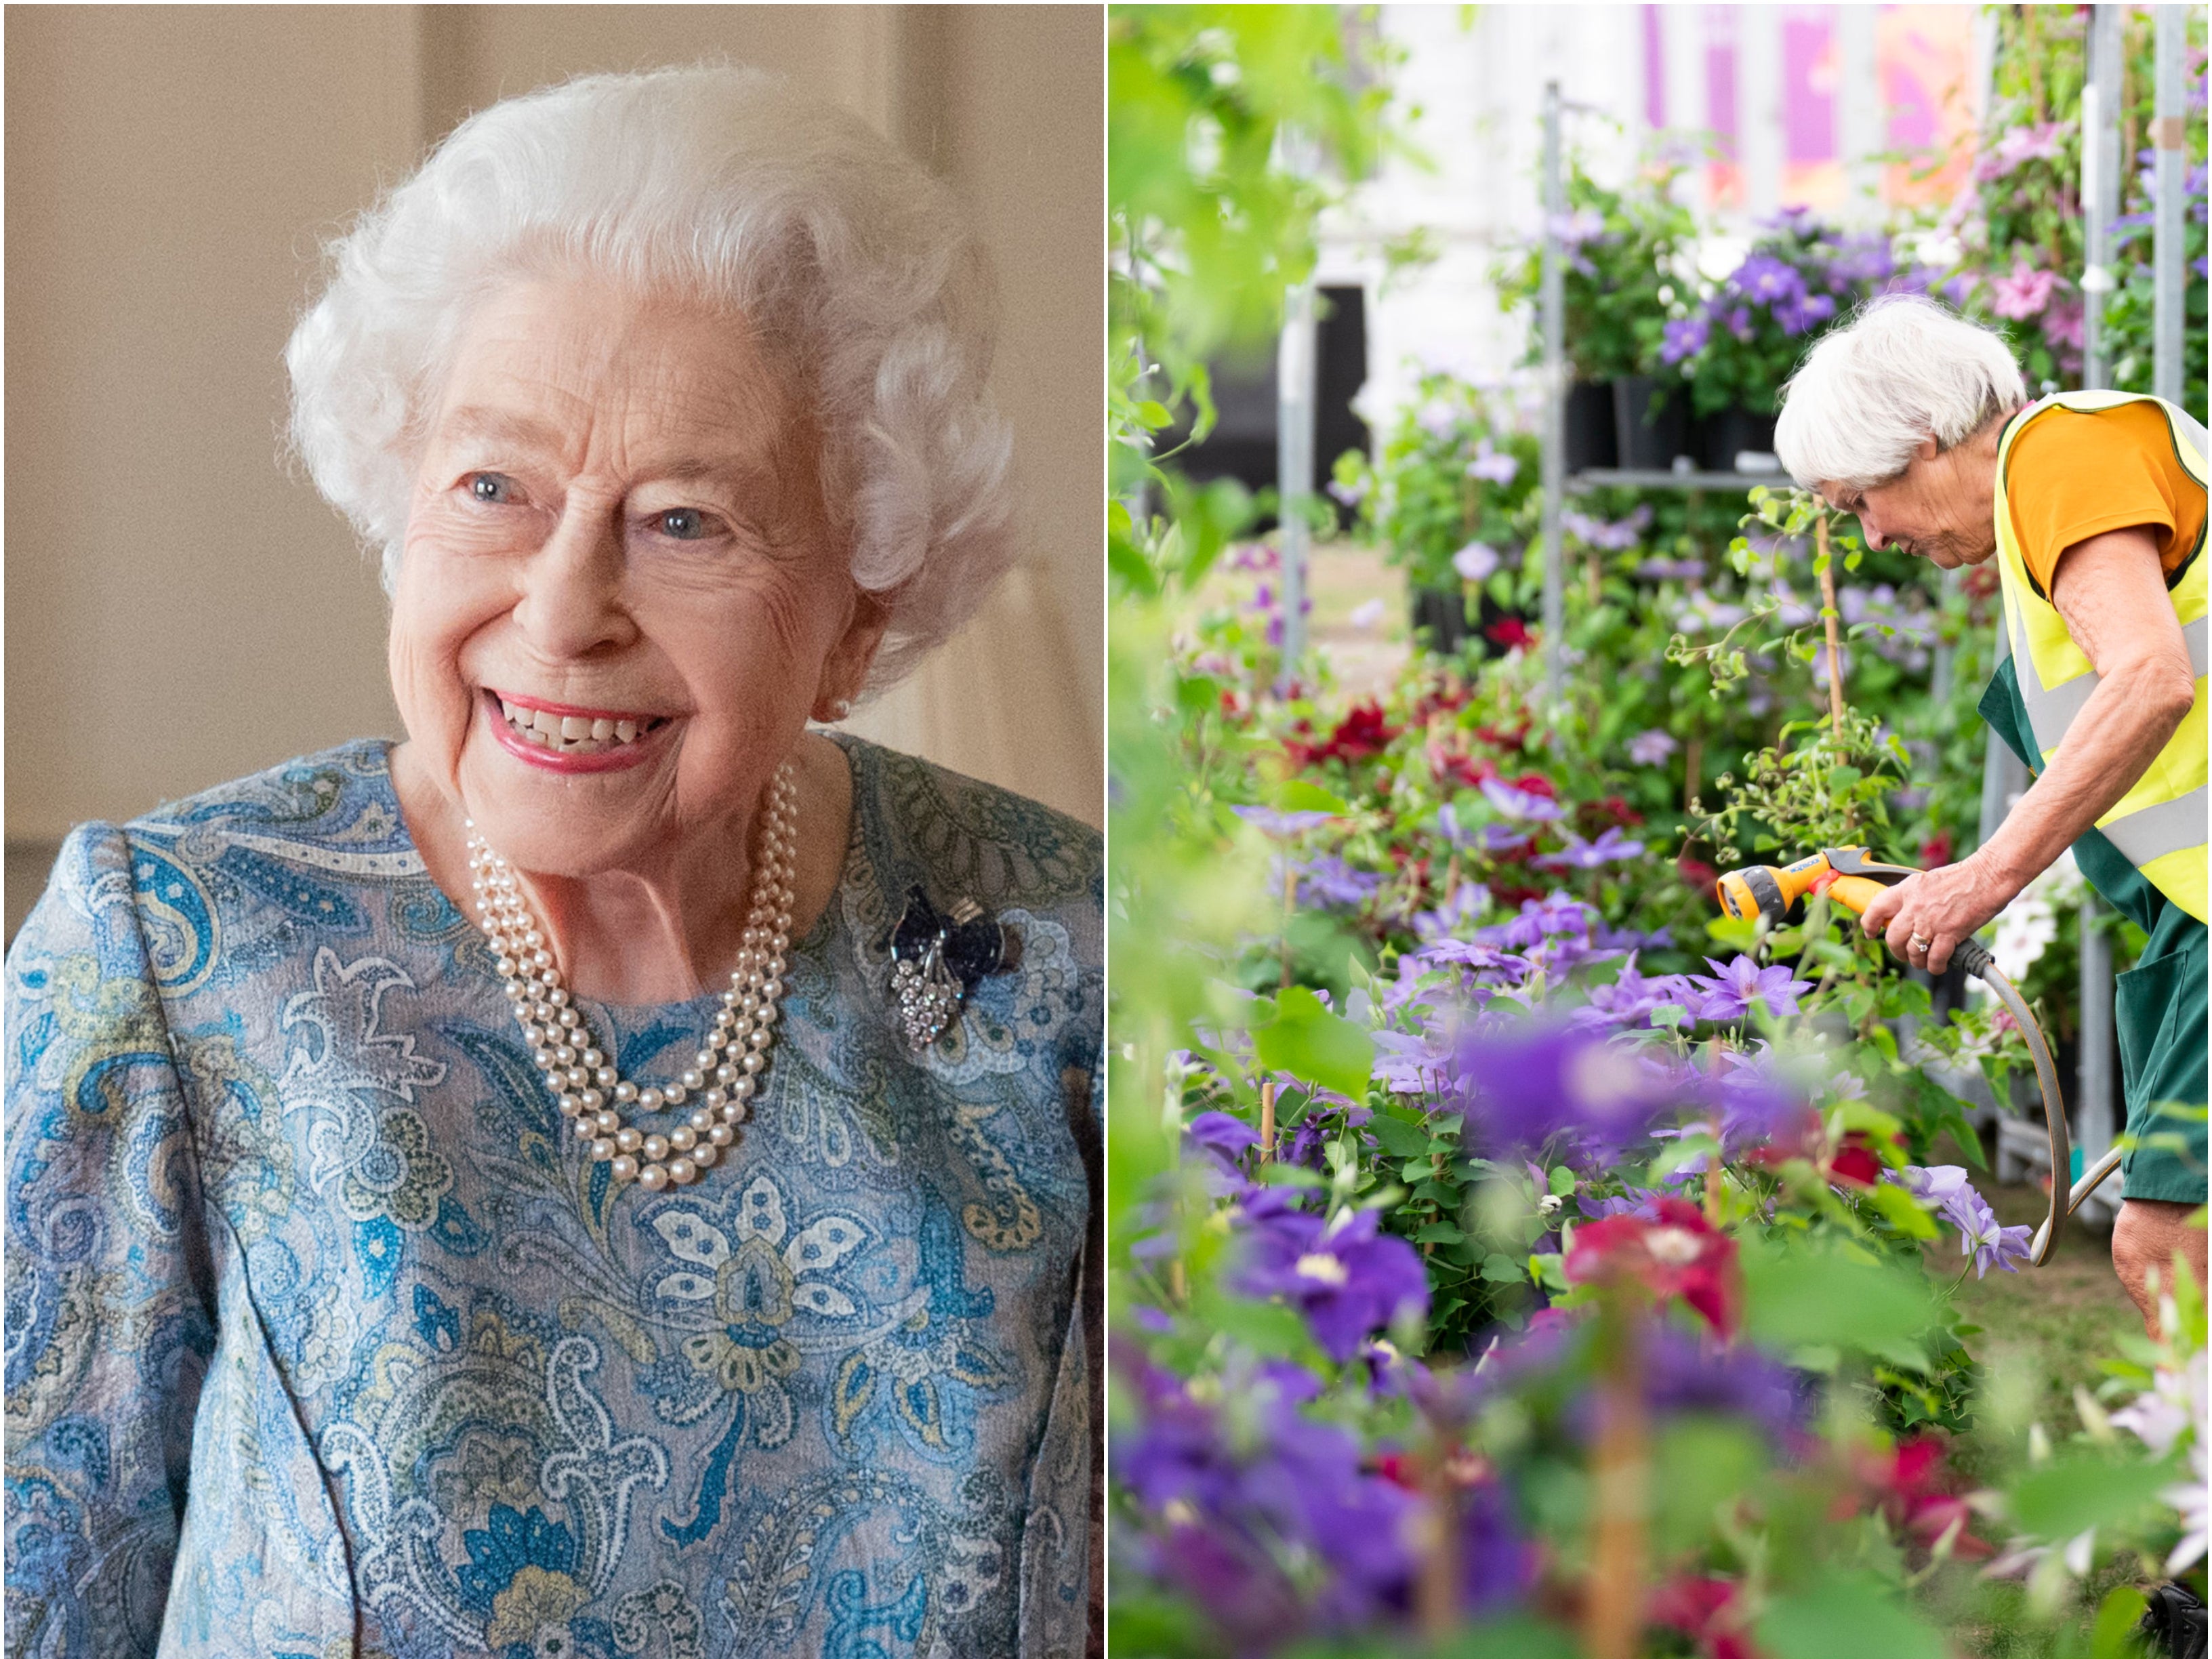 The flower show will commemorate the Queen’s 70-year reign